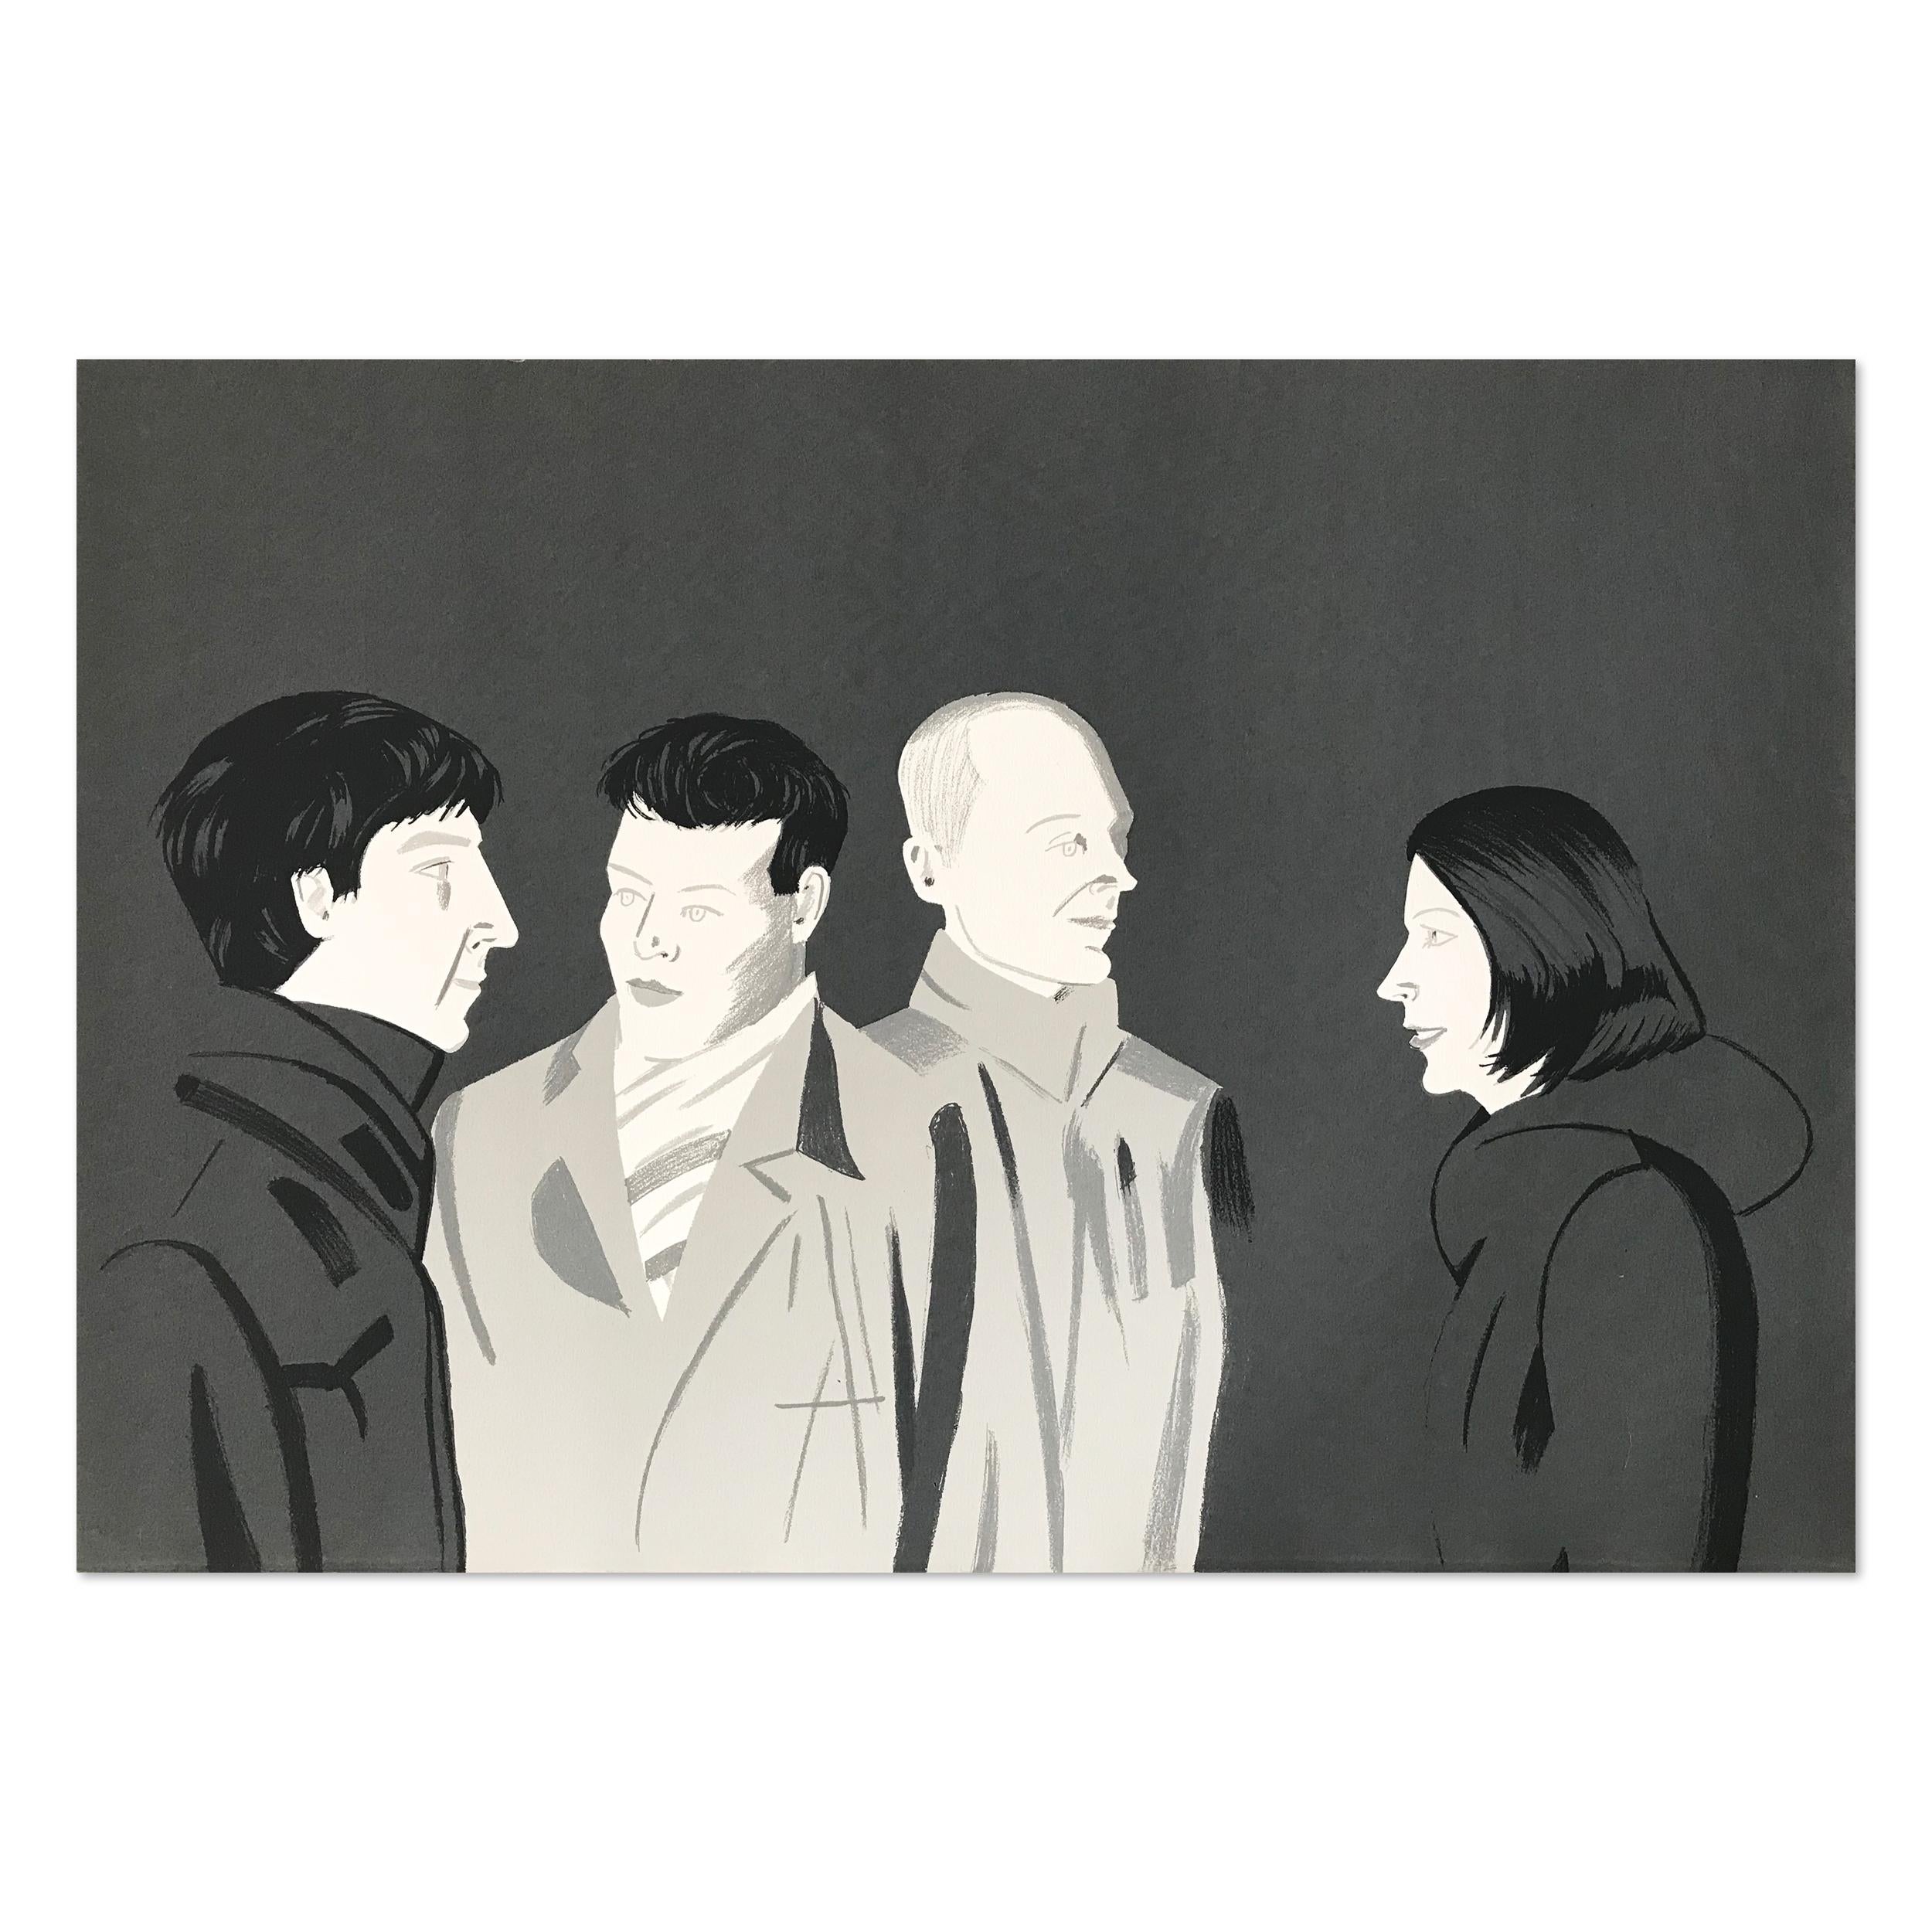 Alex Katz (American, b. 1927)
Unfamiliar Image, 2001
Medium: Screenprint in colors, on wove paper
Dimensions: 76 × 112 cm (29 9/10 × 44 1/10 in)
Edition of 100 (aside from 13 artist's proofs): Hand signed and numbered in pencil, lower left
Printed